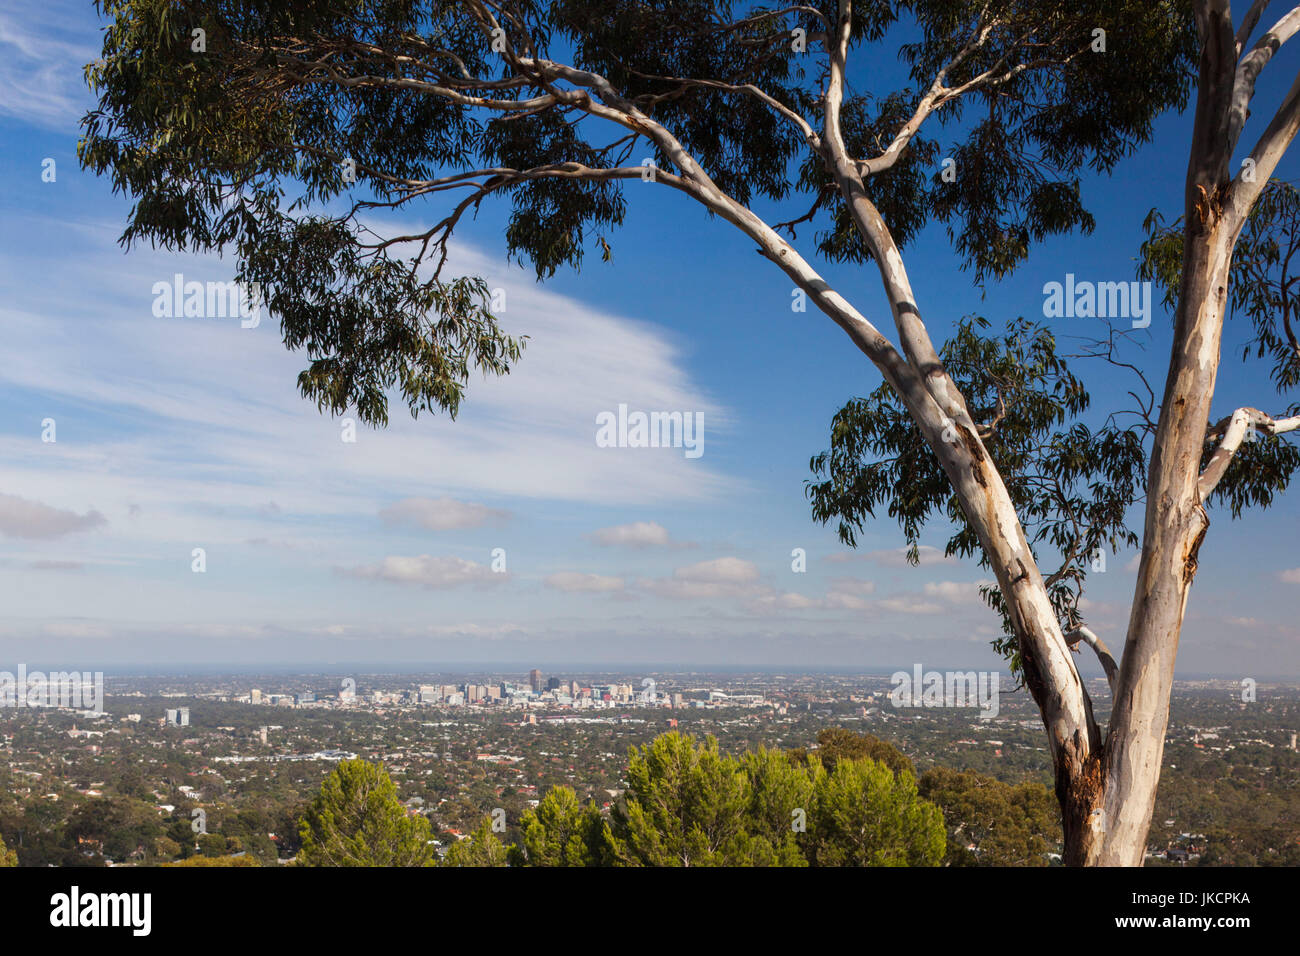 Australia, South Australia, Adelaide Hills, Crafers, elevated skyline of Adelaide from the Mount Lofty Summit Stock Photo